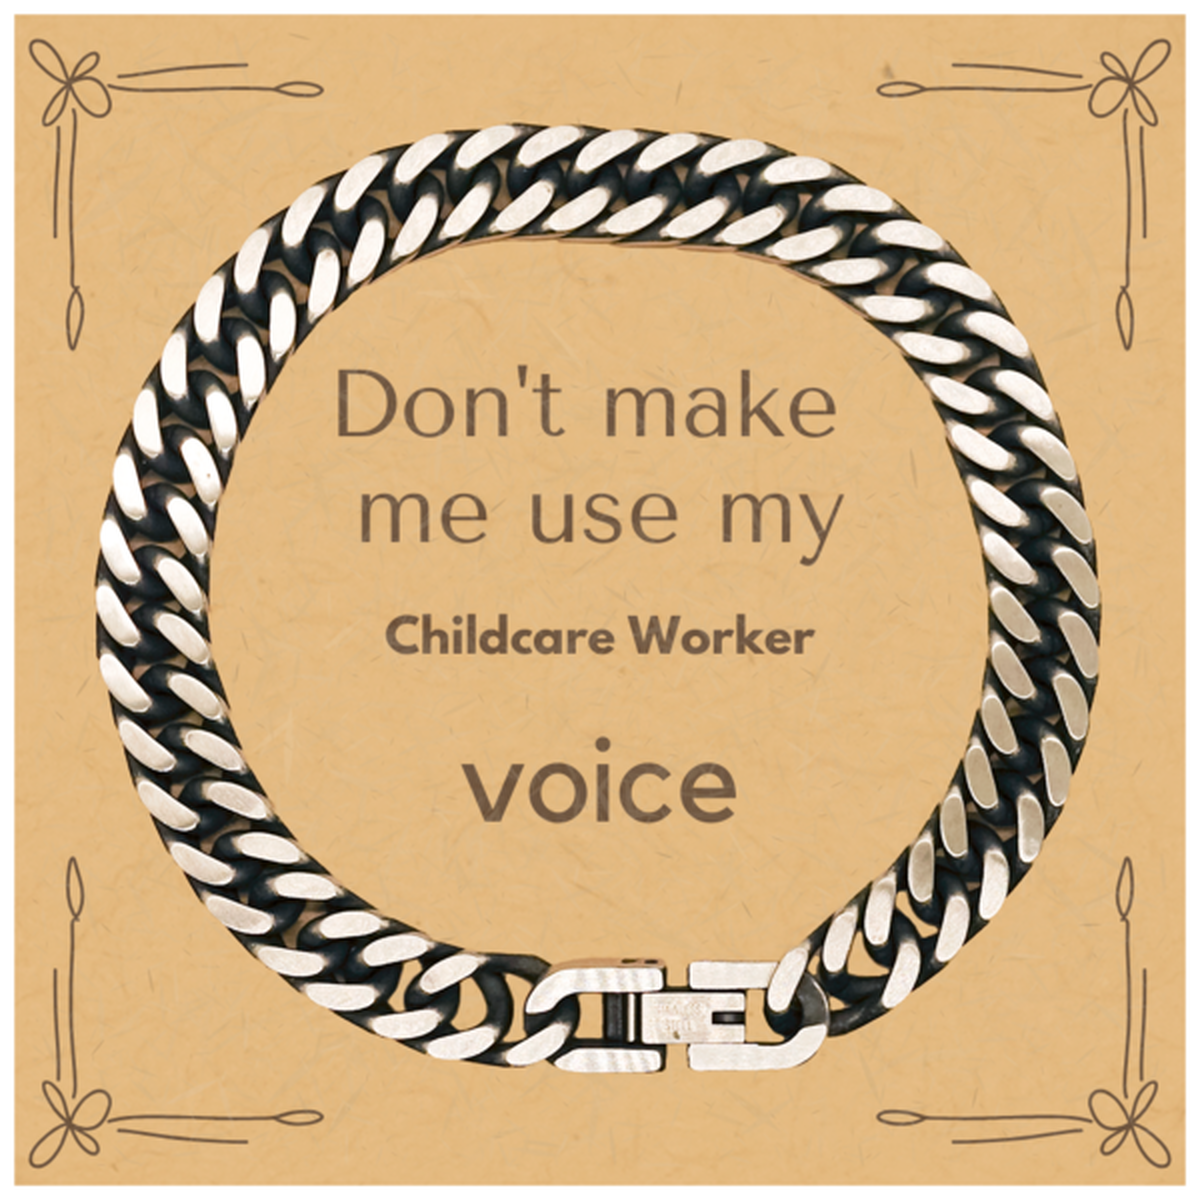 Don't make me use my Childcare Worker voice, Sarcasm Childcare Worker Card Gifts, Christmas Childcare Worker Cuban Link Chain Bracelet Birthday Unique Gifts For Childcare Worker Coworkers, Men, Women, Colleague, Friends